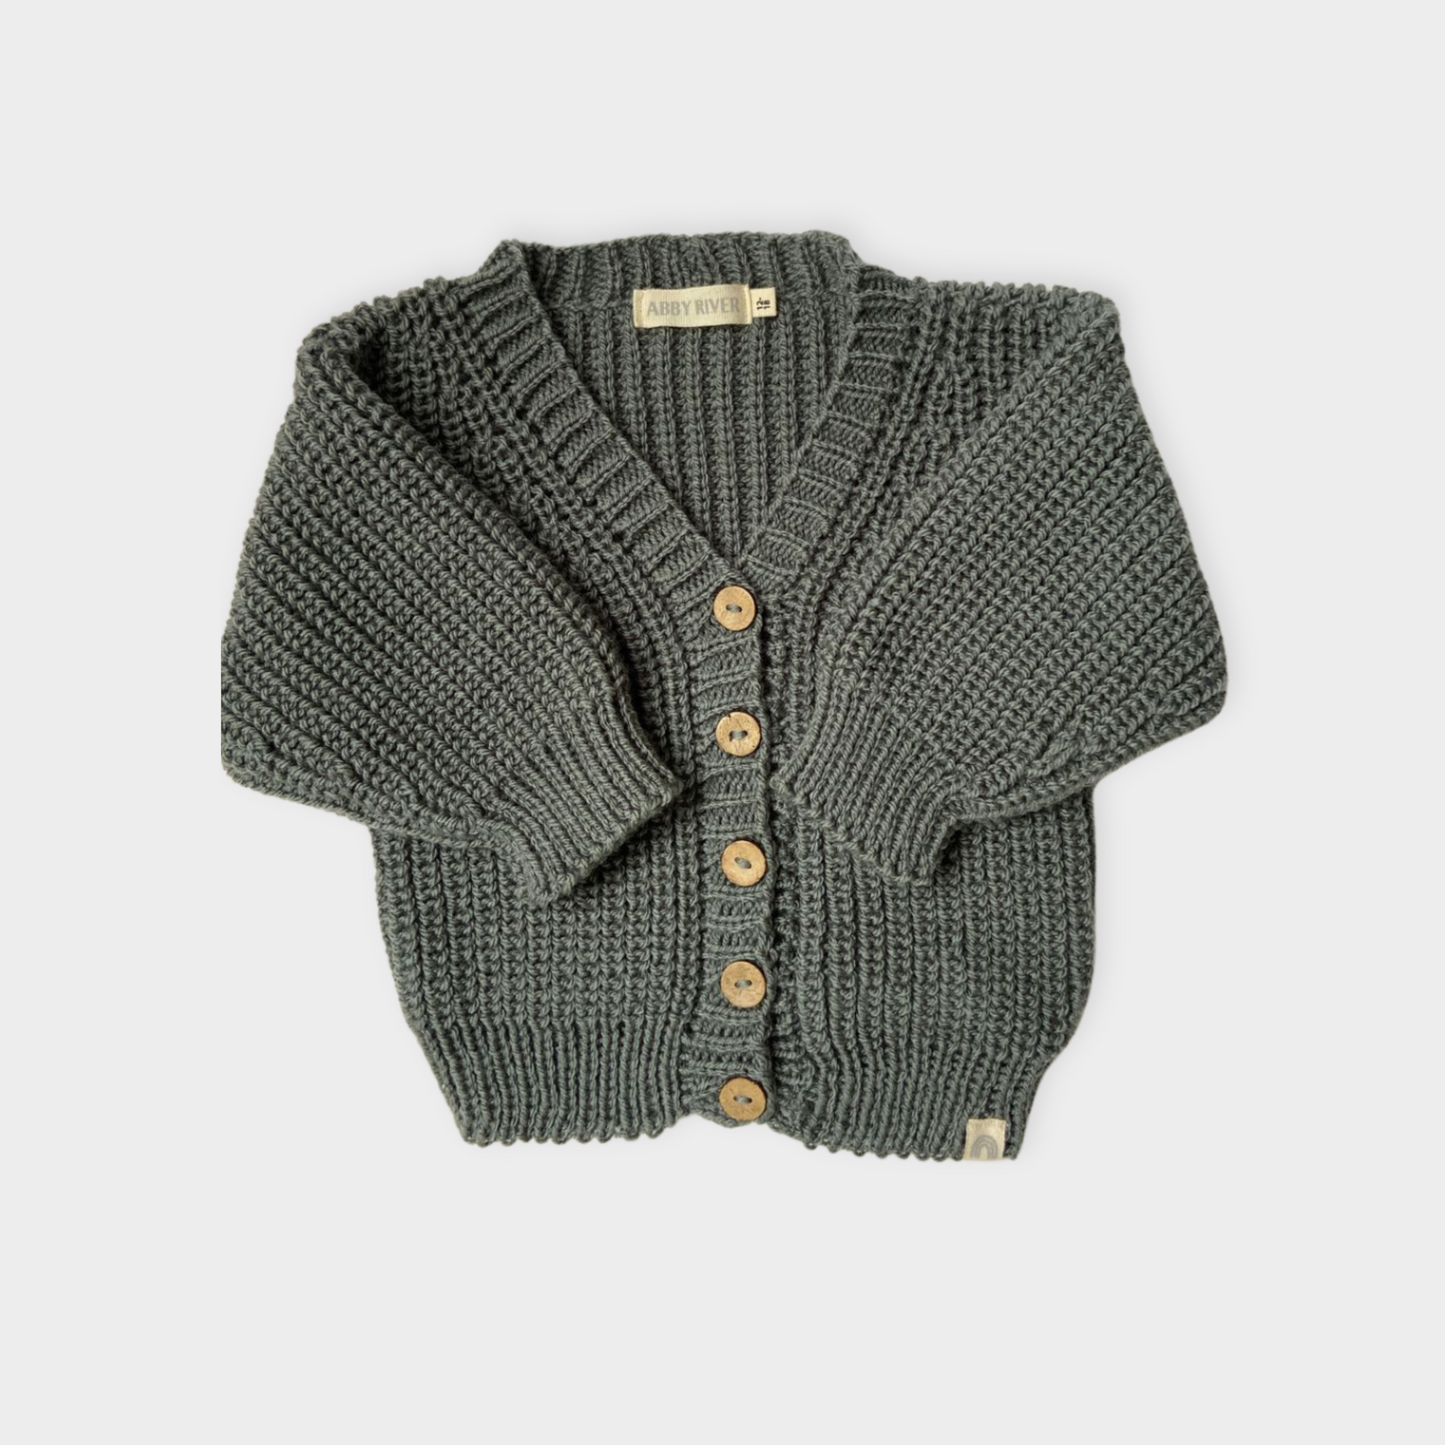 Double Knit Wool Cadigan